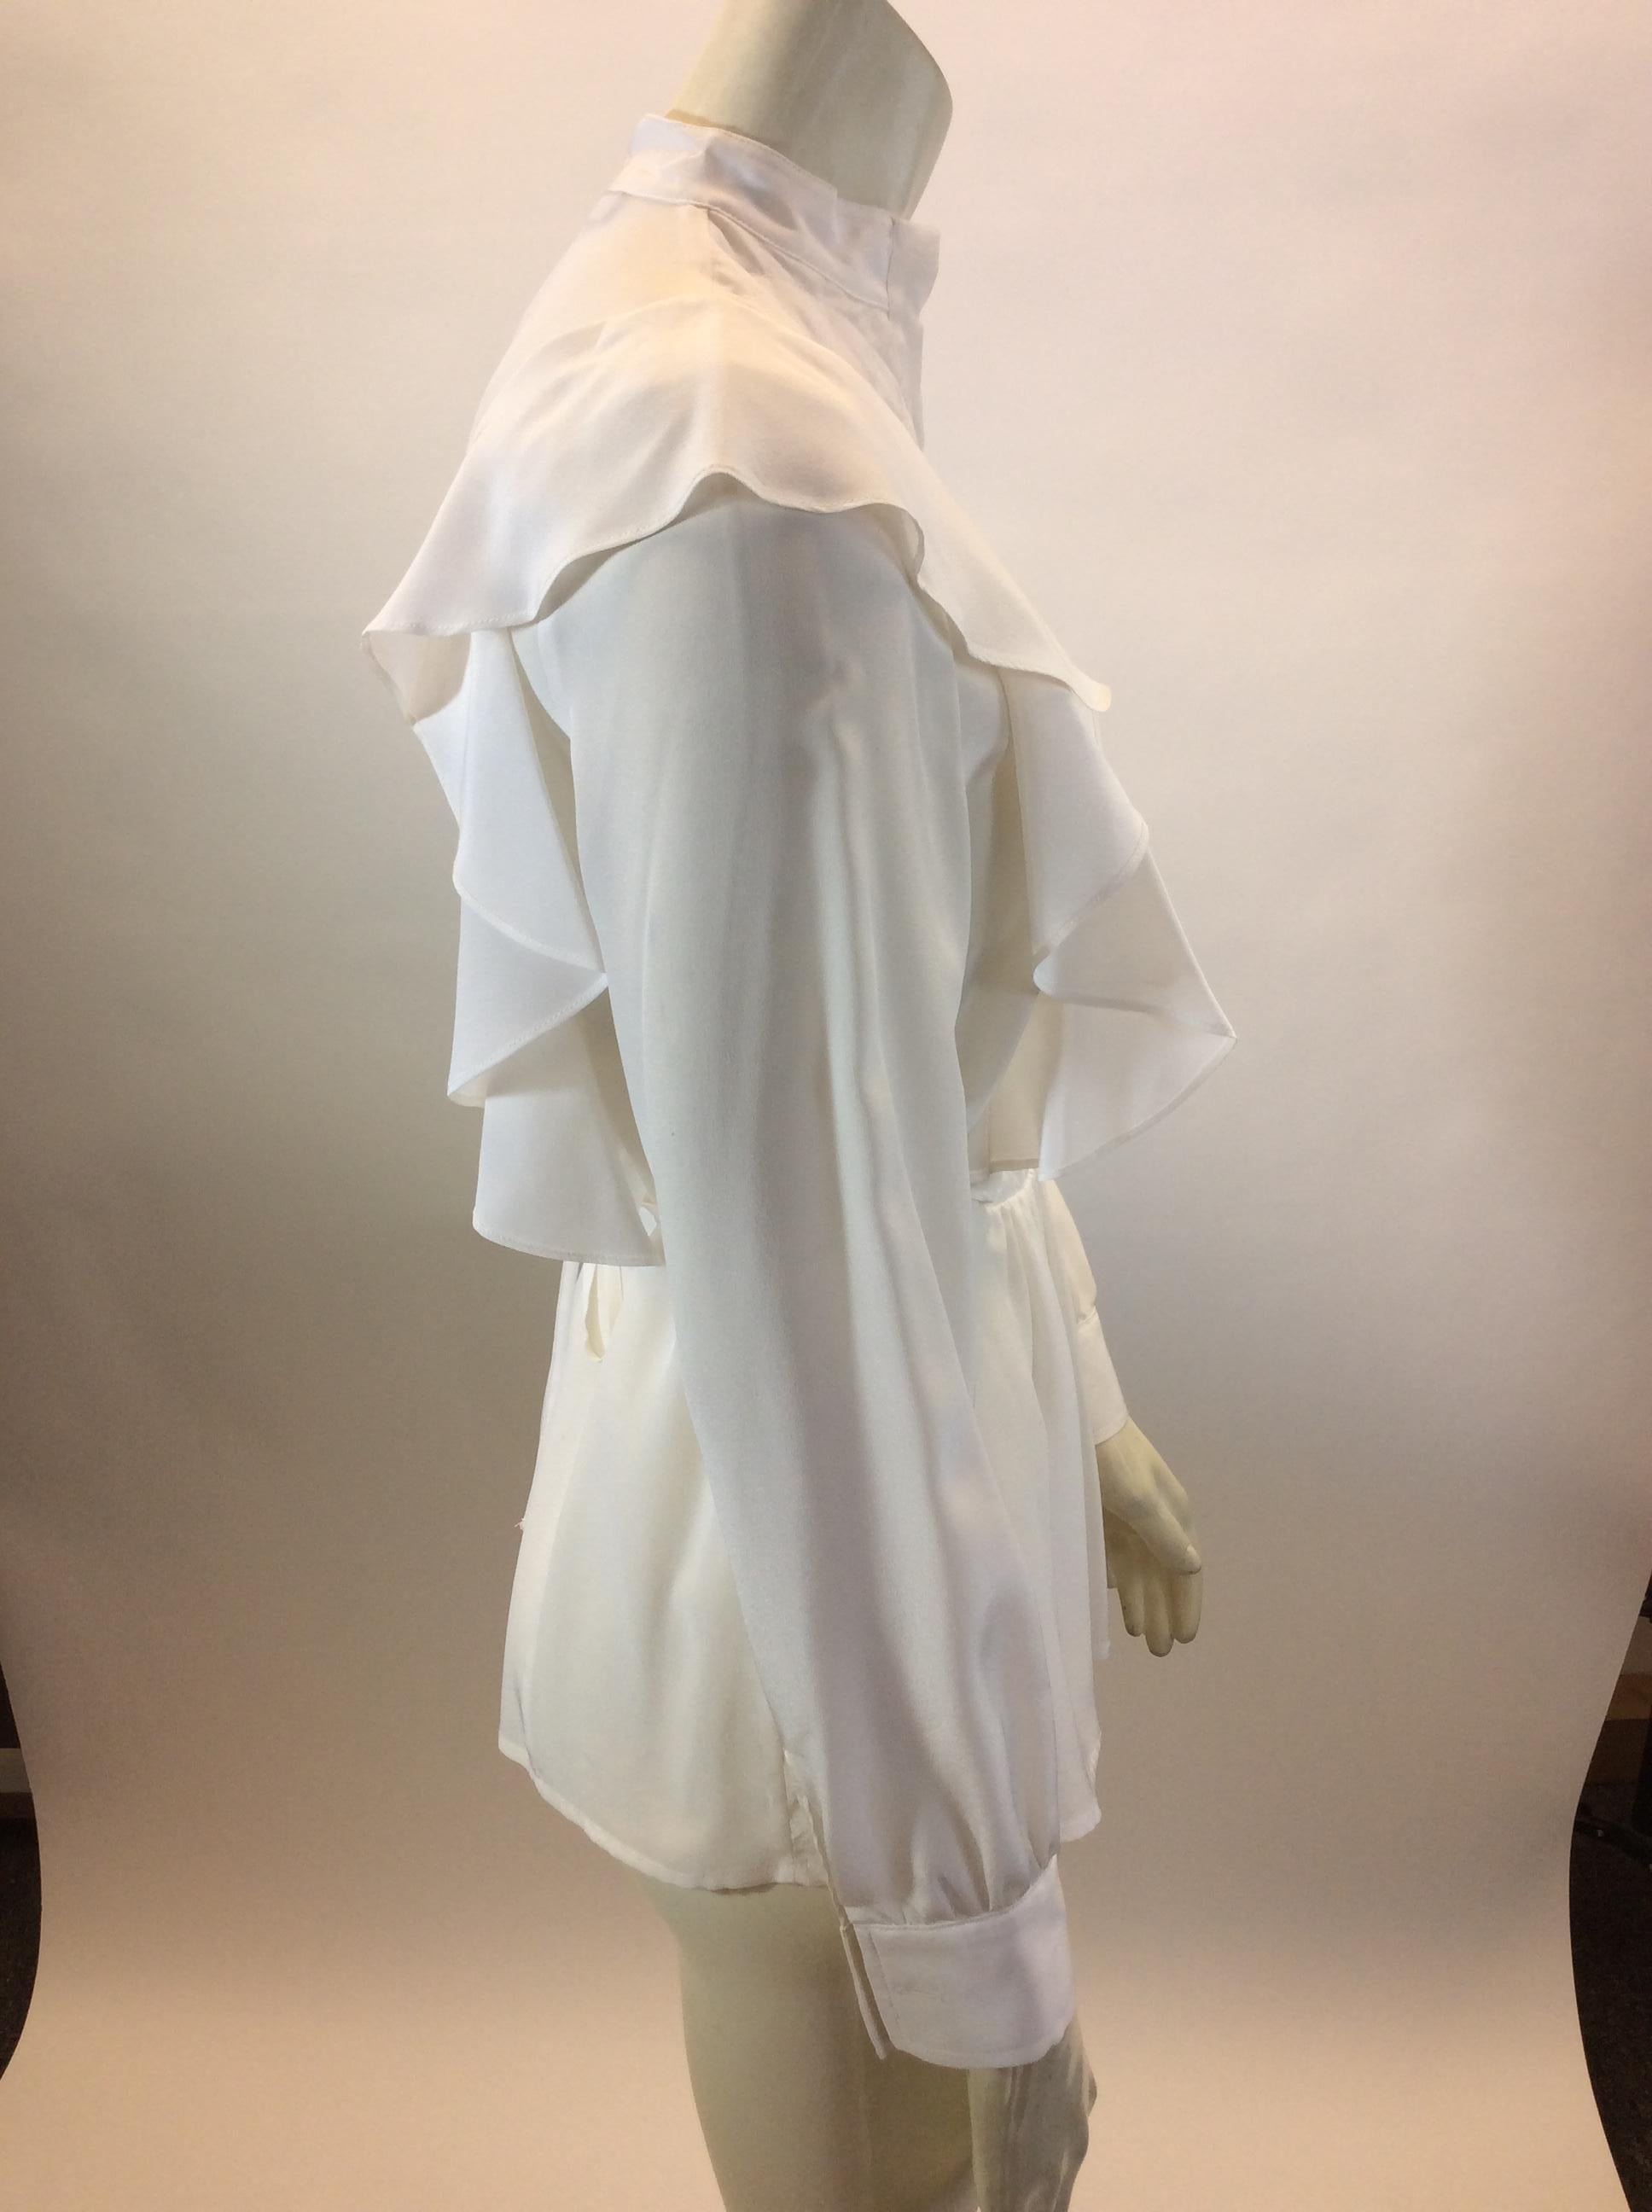 Givenchy White Silk Blouse In Good Condition For Sale In Narberth, PA